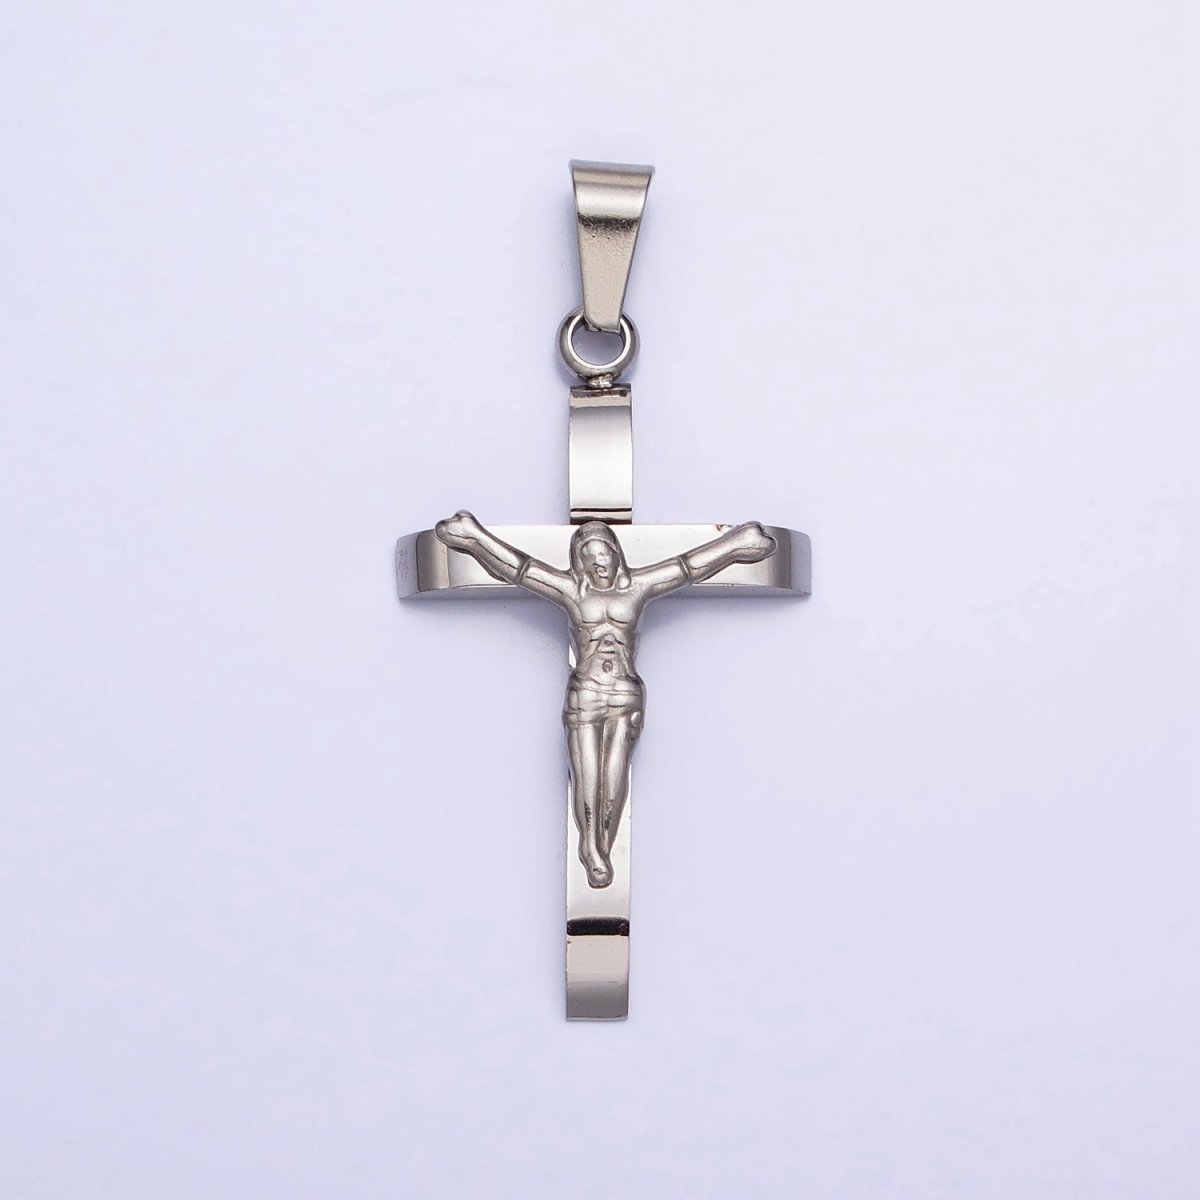 Crucifix Cross Pendant in 24K Gold Filled Jesus in the Cross Medallion for Religious Unisex Jewelry Making P-1114 - DLUXCA